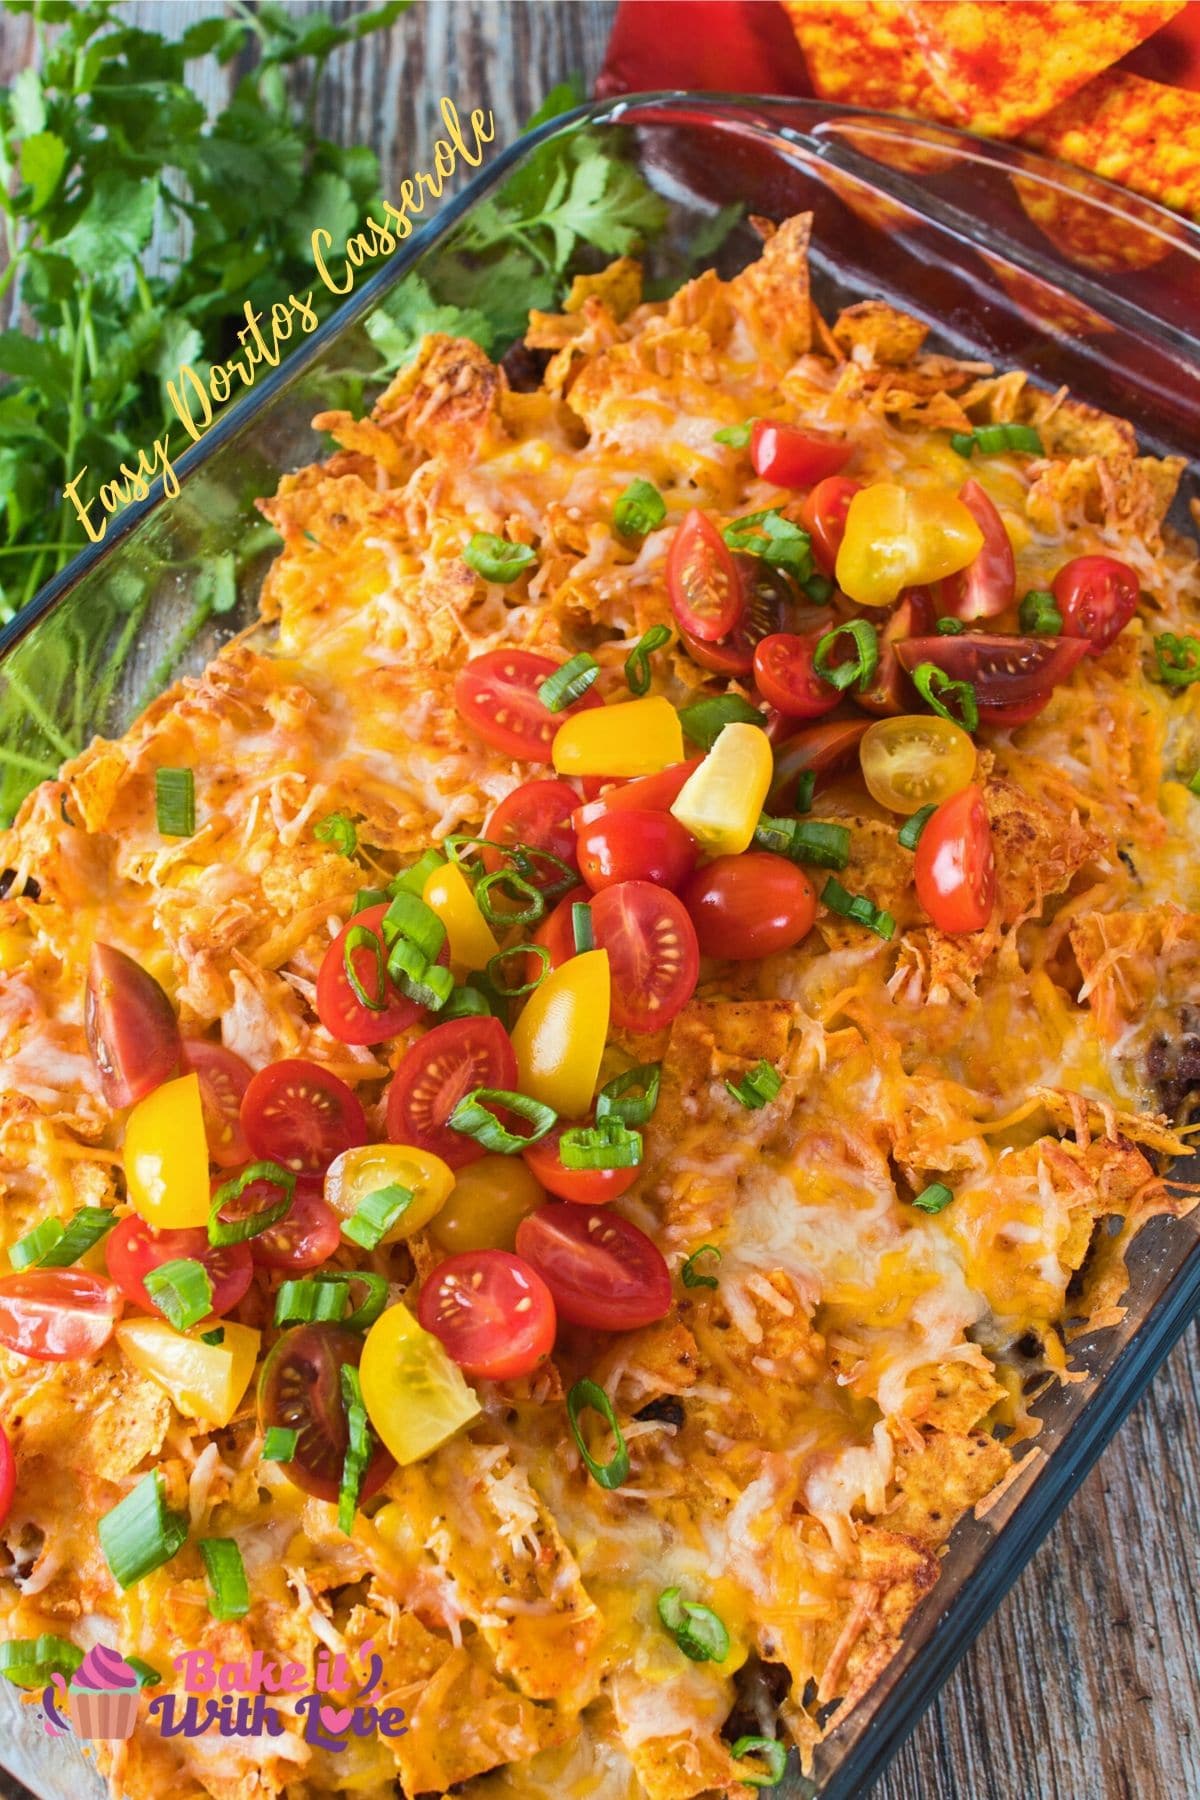 This super easy layered ground beef Doritos Casserole is a family favorite dinner that's ready in no time!